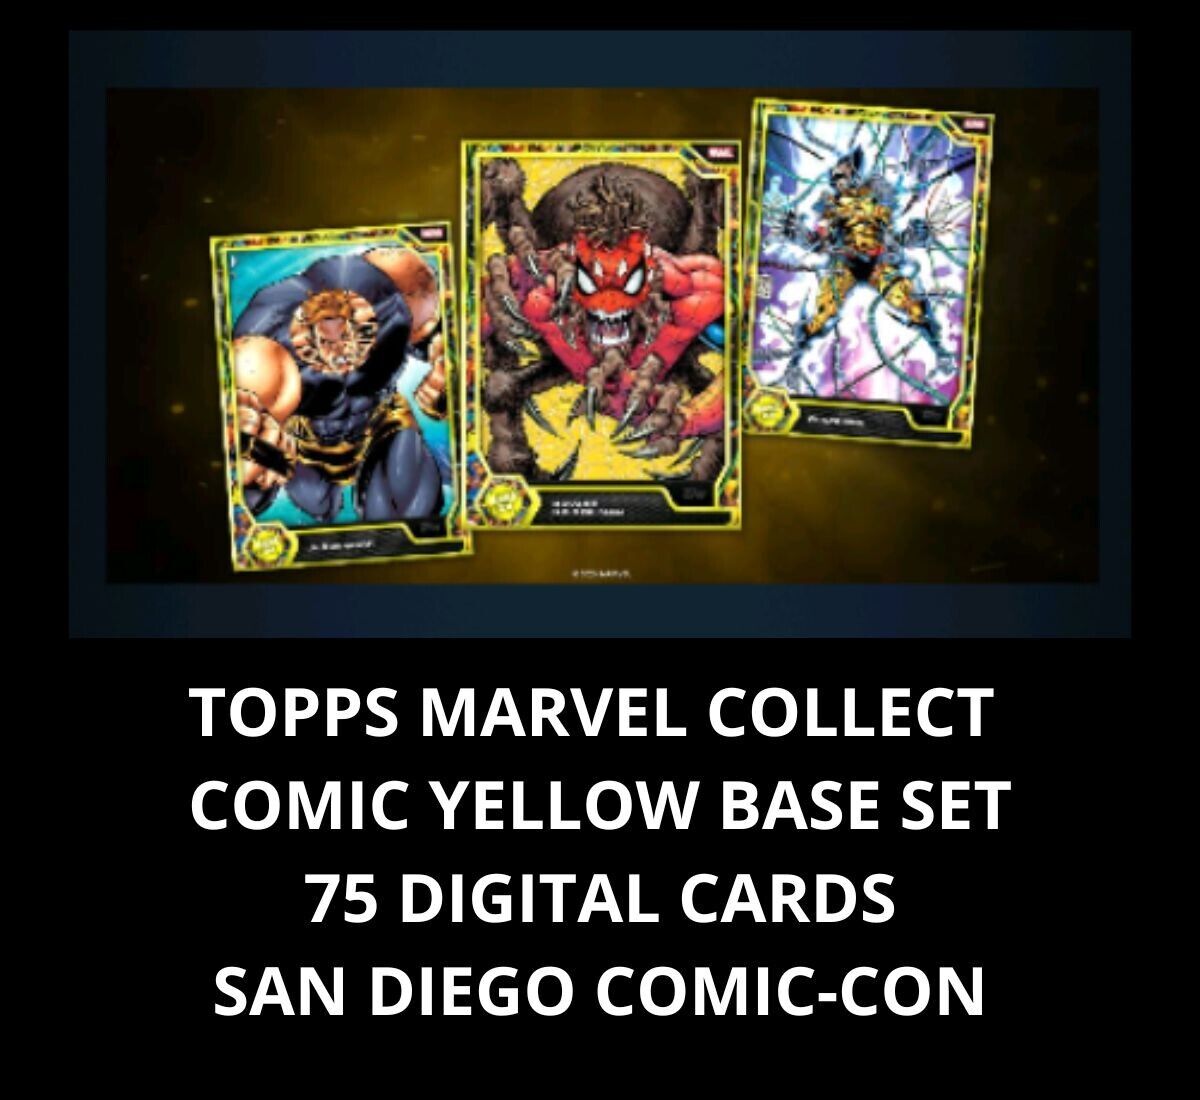 TOPPS MARVEL COLLECT  COMIC YELLOW BASE SET 75 DIGITAL CARDS SAN DIEGO COMIC-CON